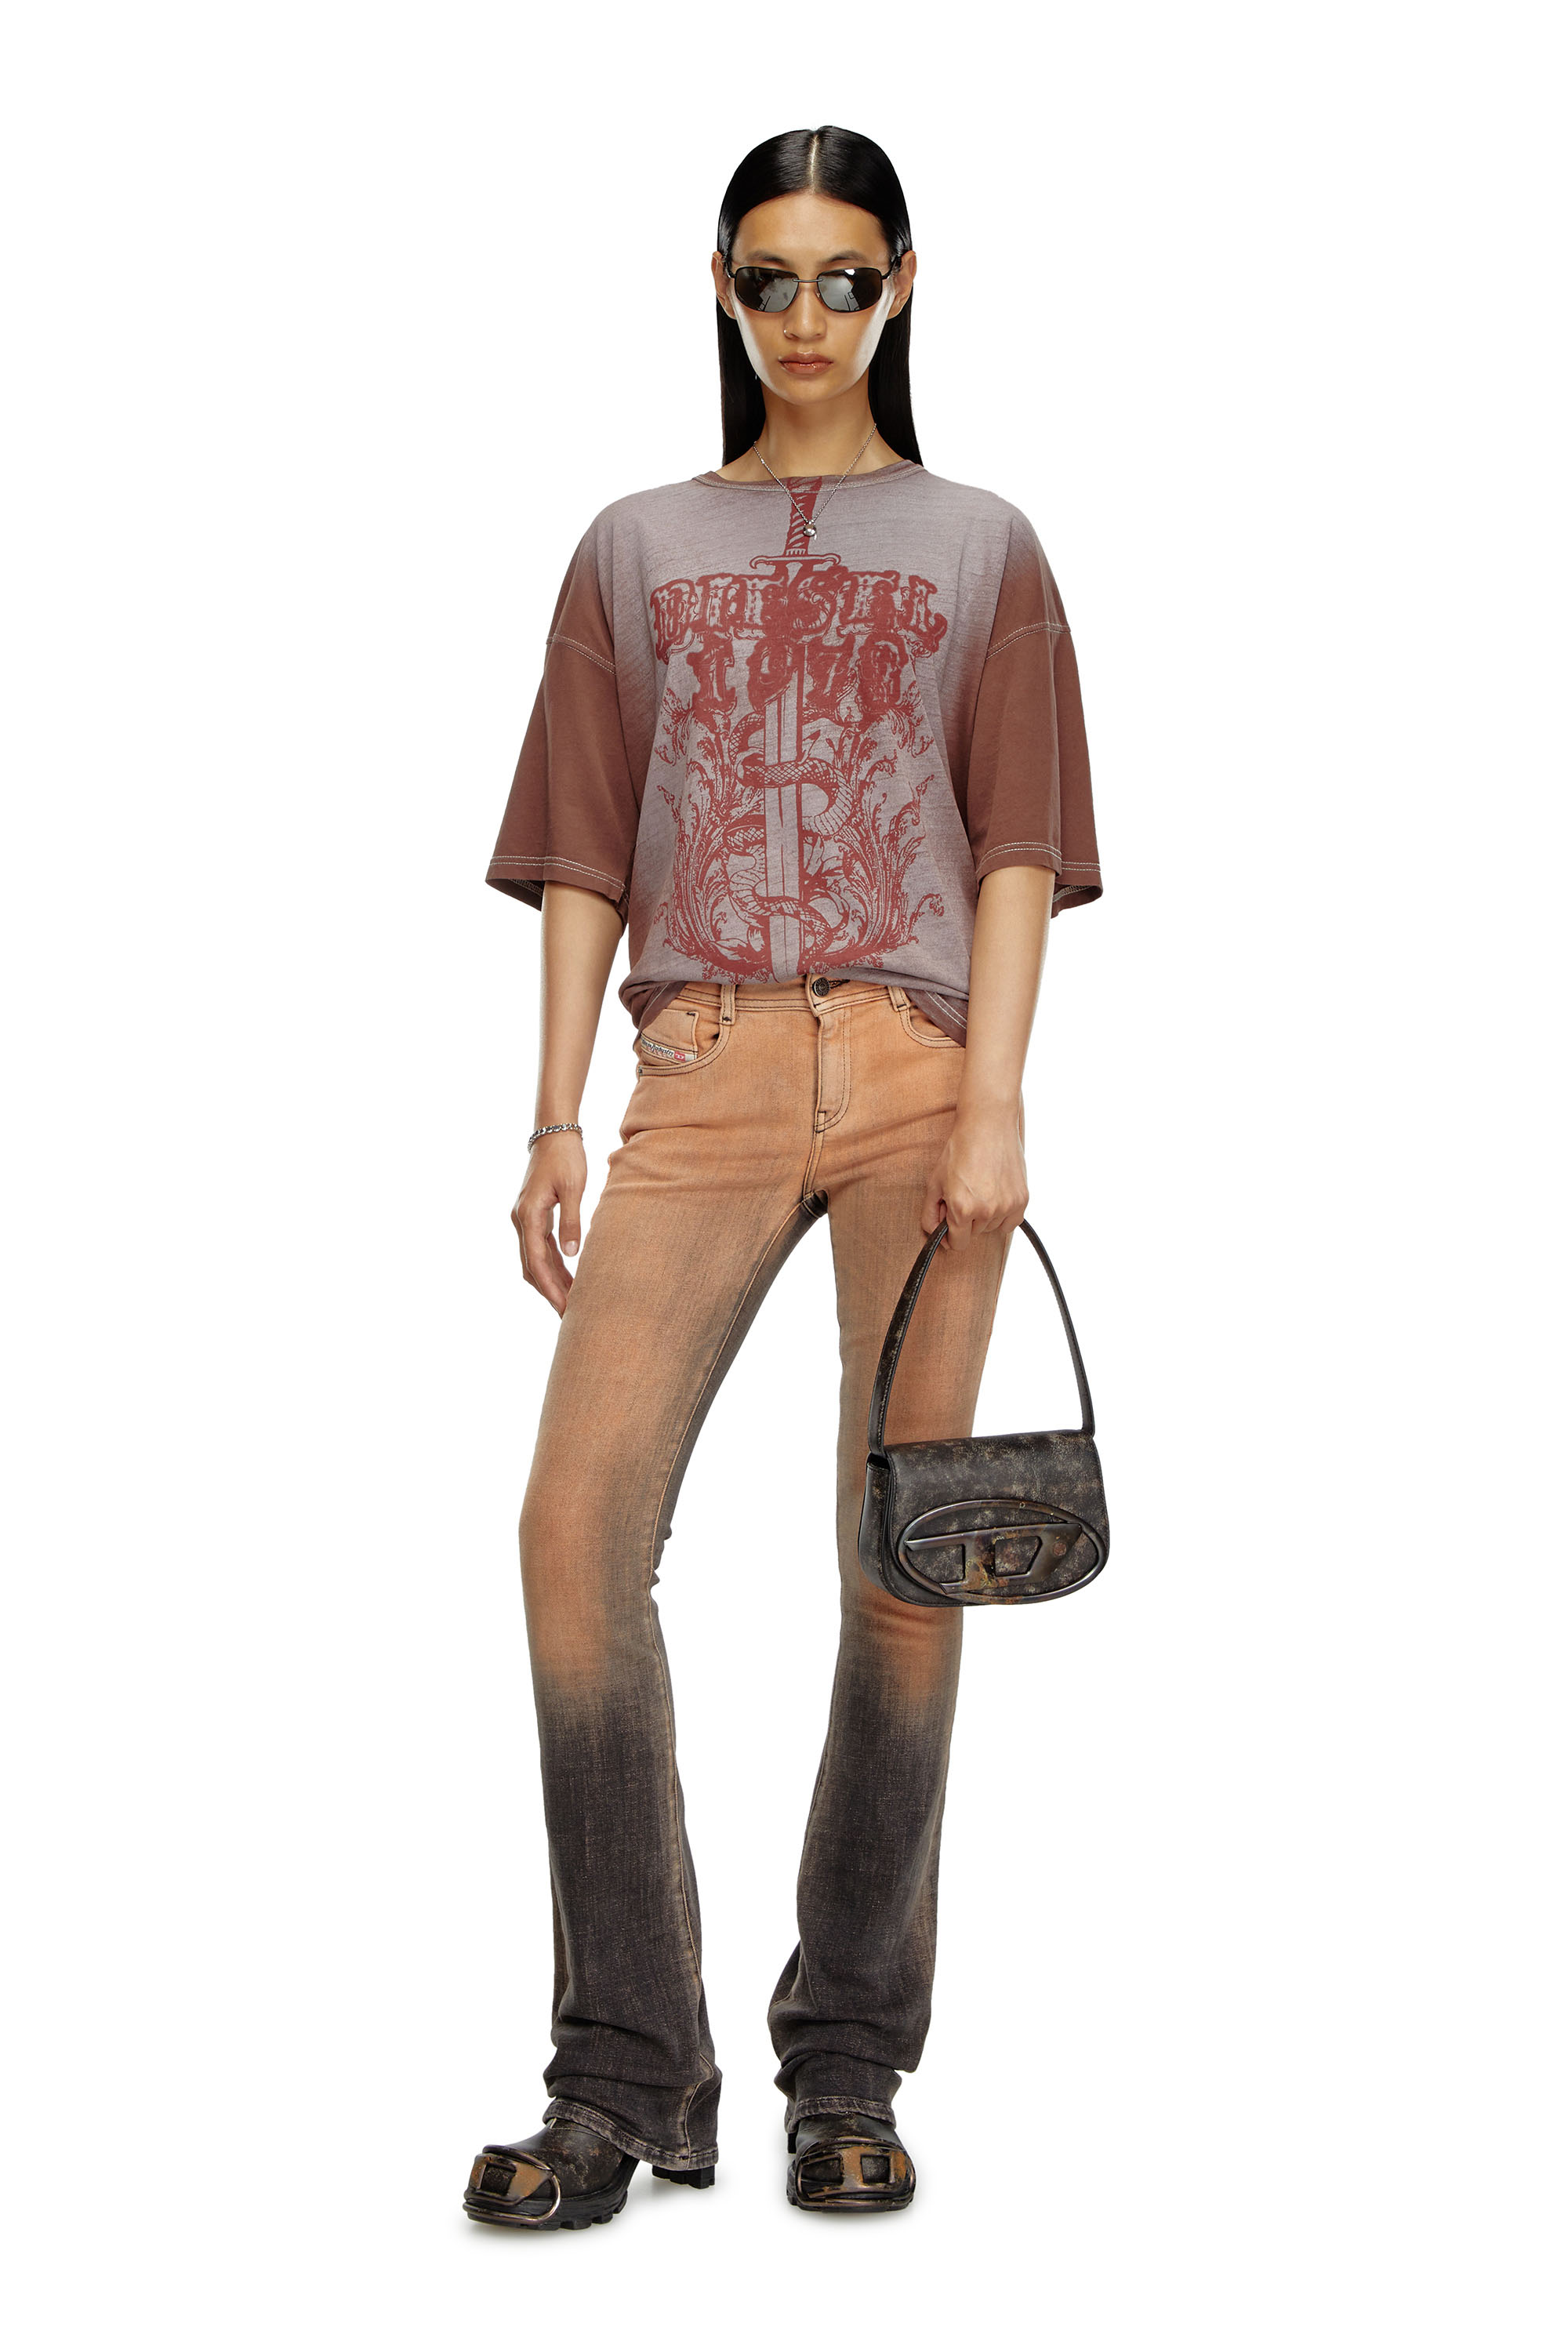 Diesel - Bootcut and Flare Jeans 1969 D-Ebbey 09K12, Mujer Bootcut y Flare Jeans - 1969 D-Ebbey in Multicolor - Image 1